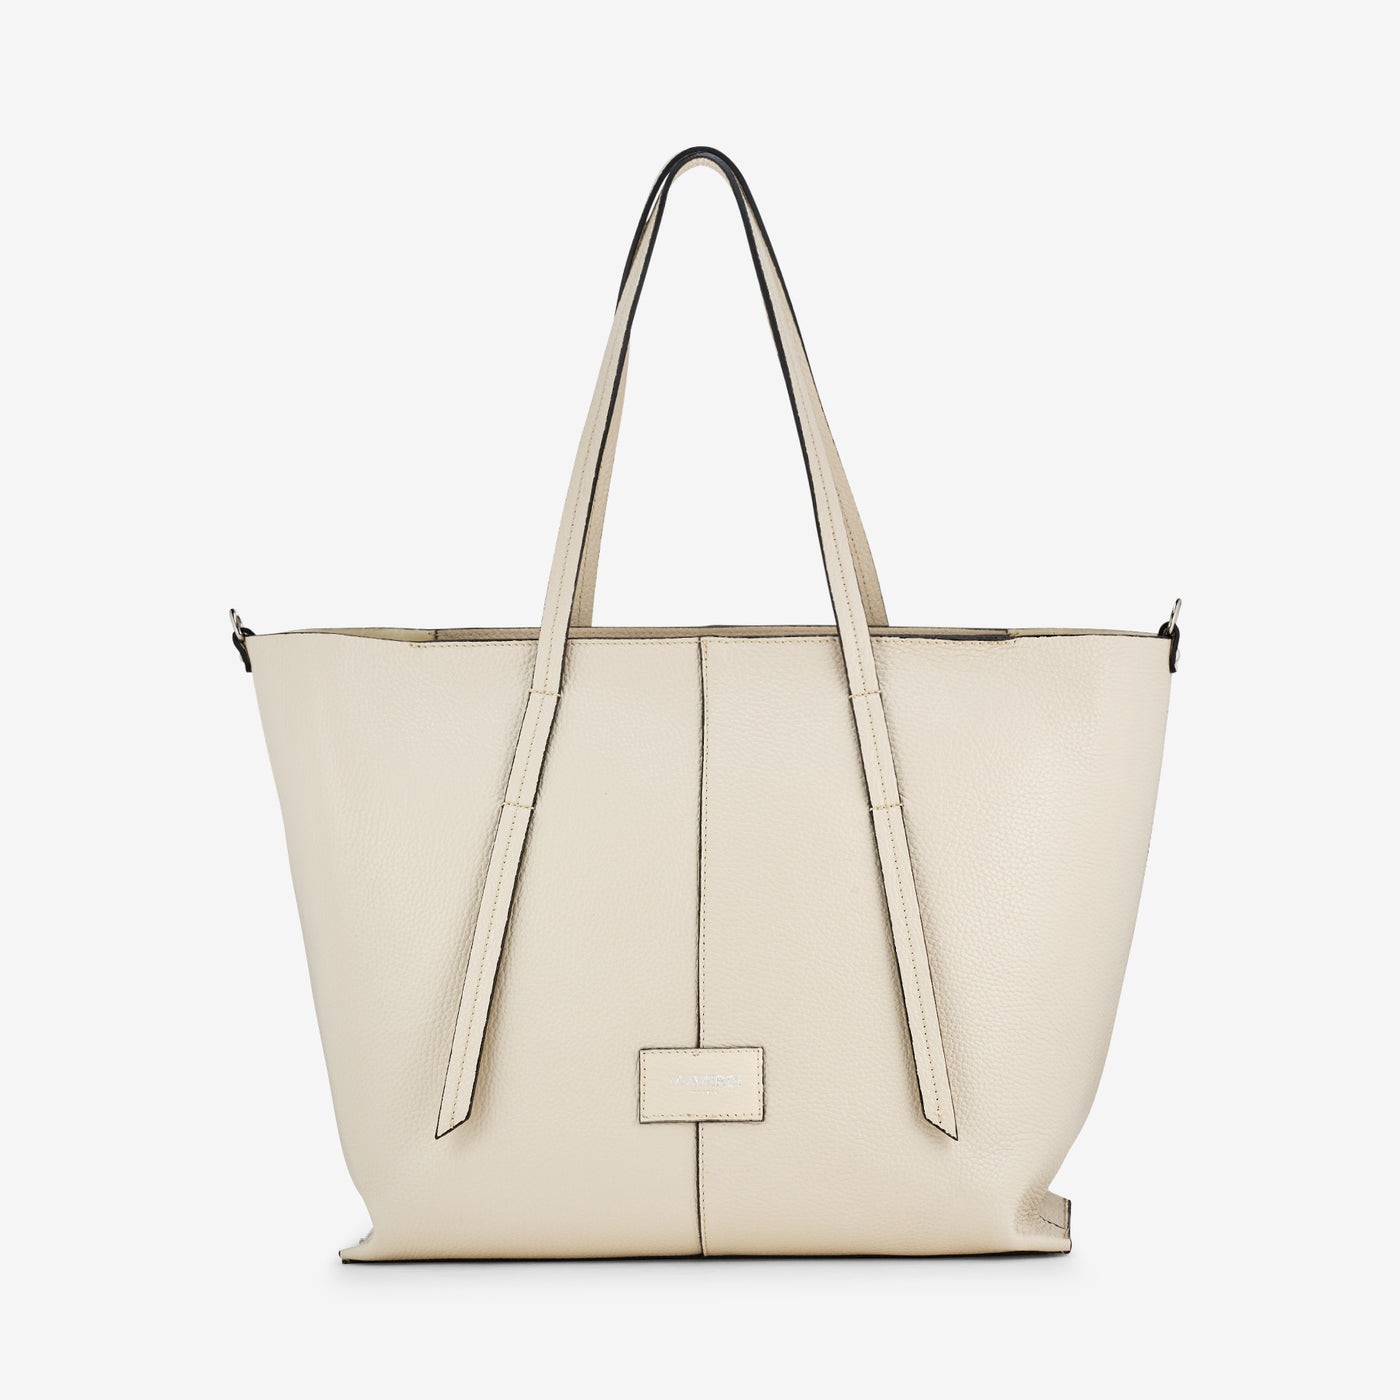 VIAVERDI Ivory Leather Tote Bag Made in Italy 